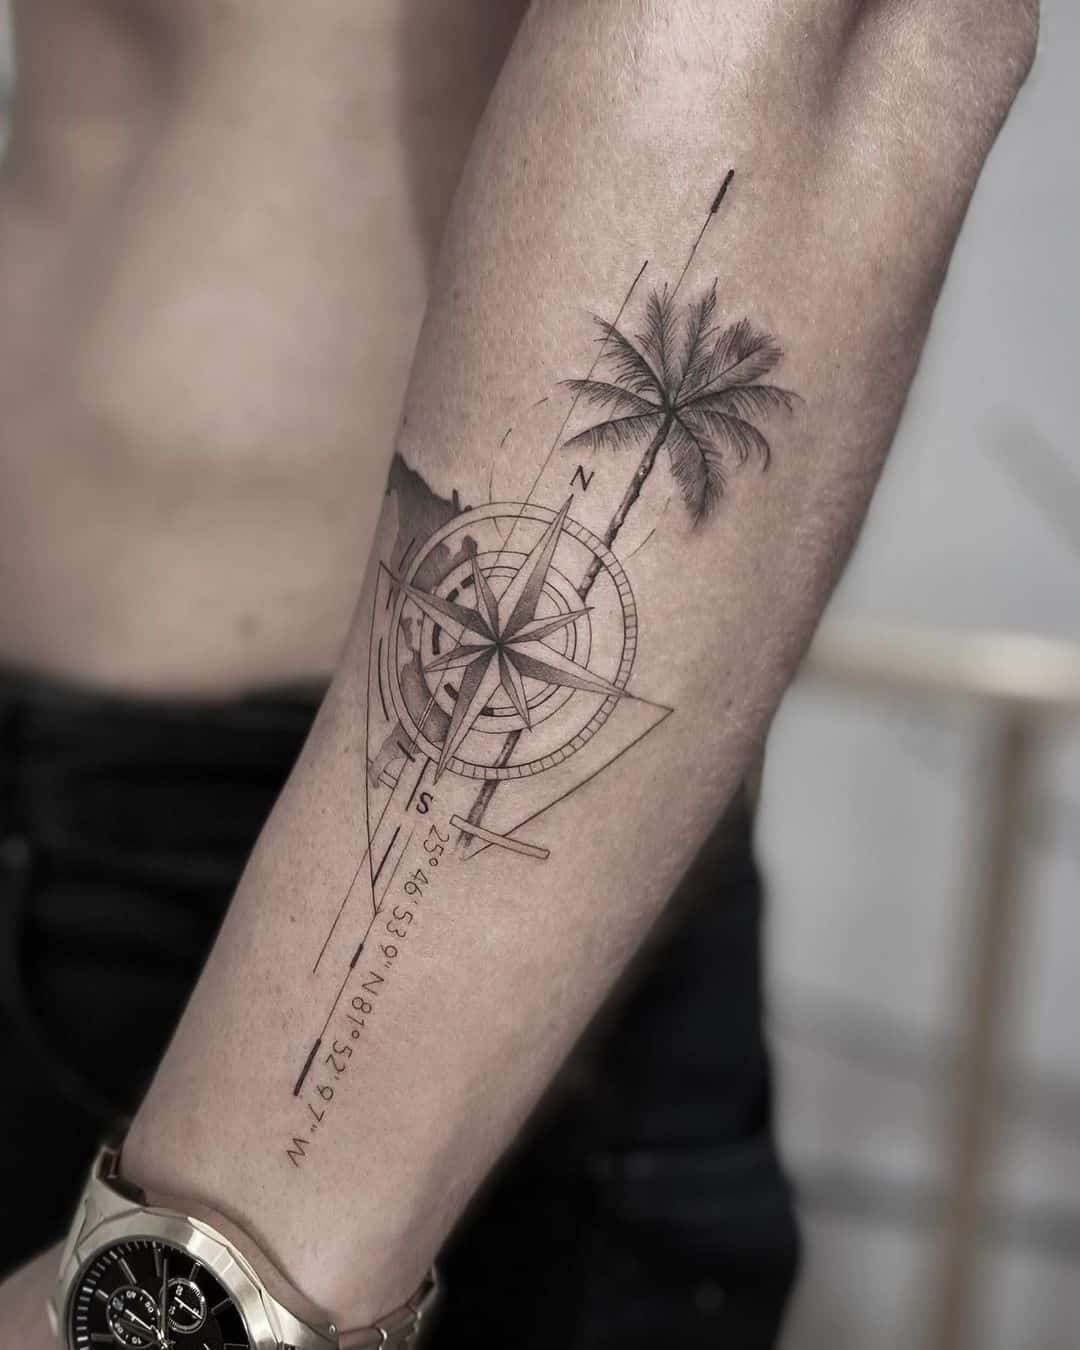 Squiggly Line Compass Tattoo with coconut tree